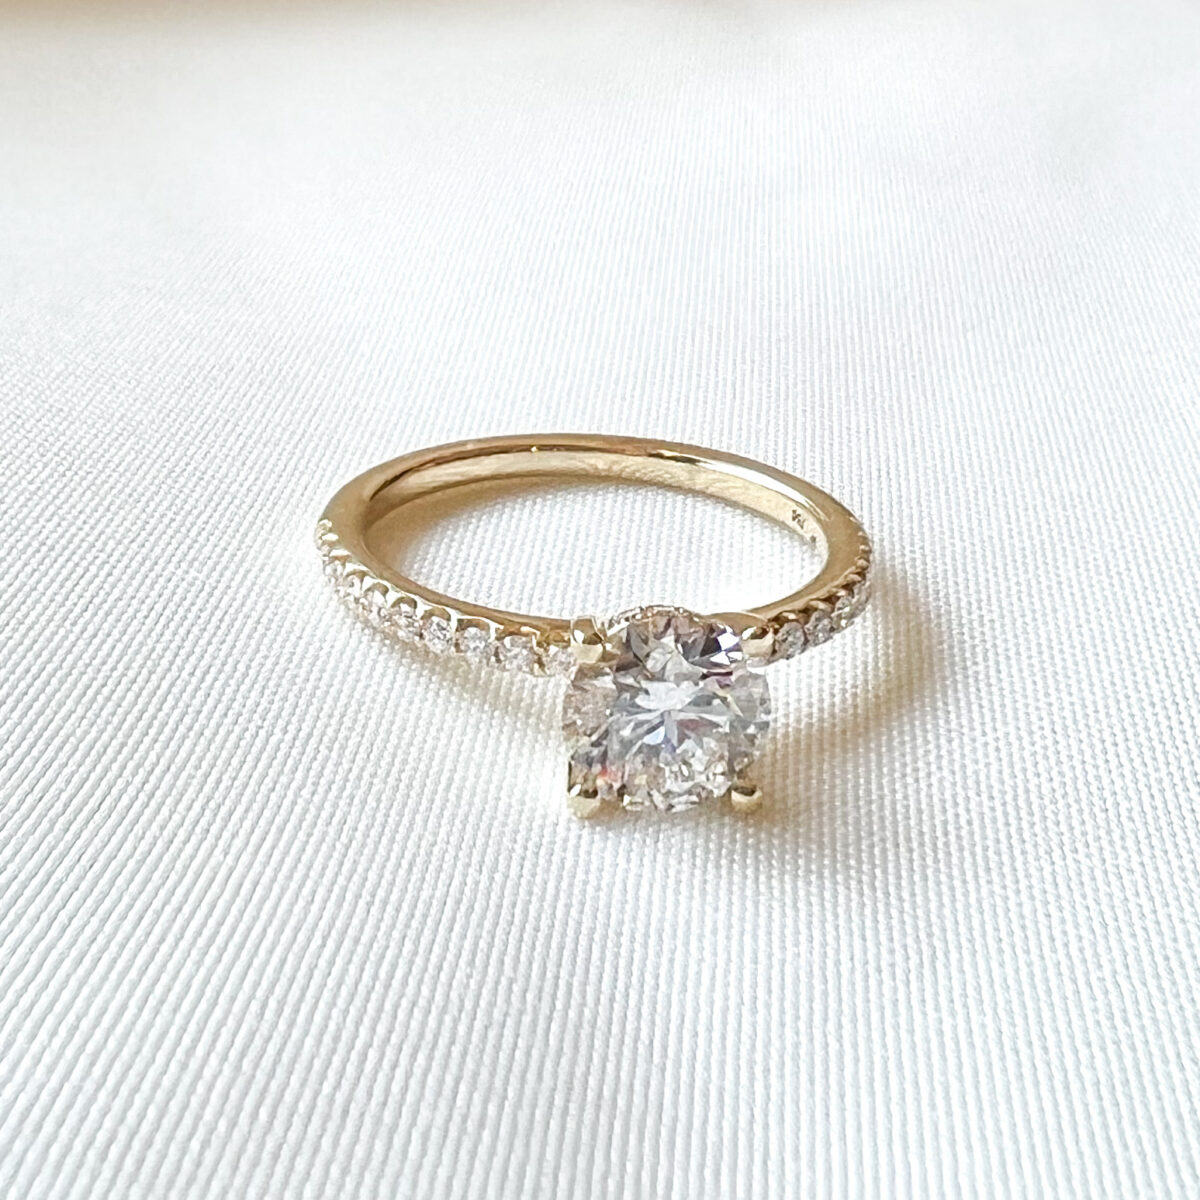 Yellow Gold 1.03CT Diamond Ring with Accents